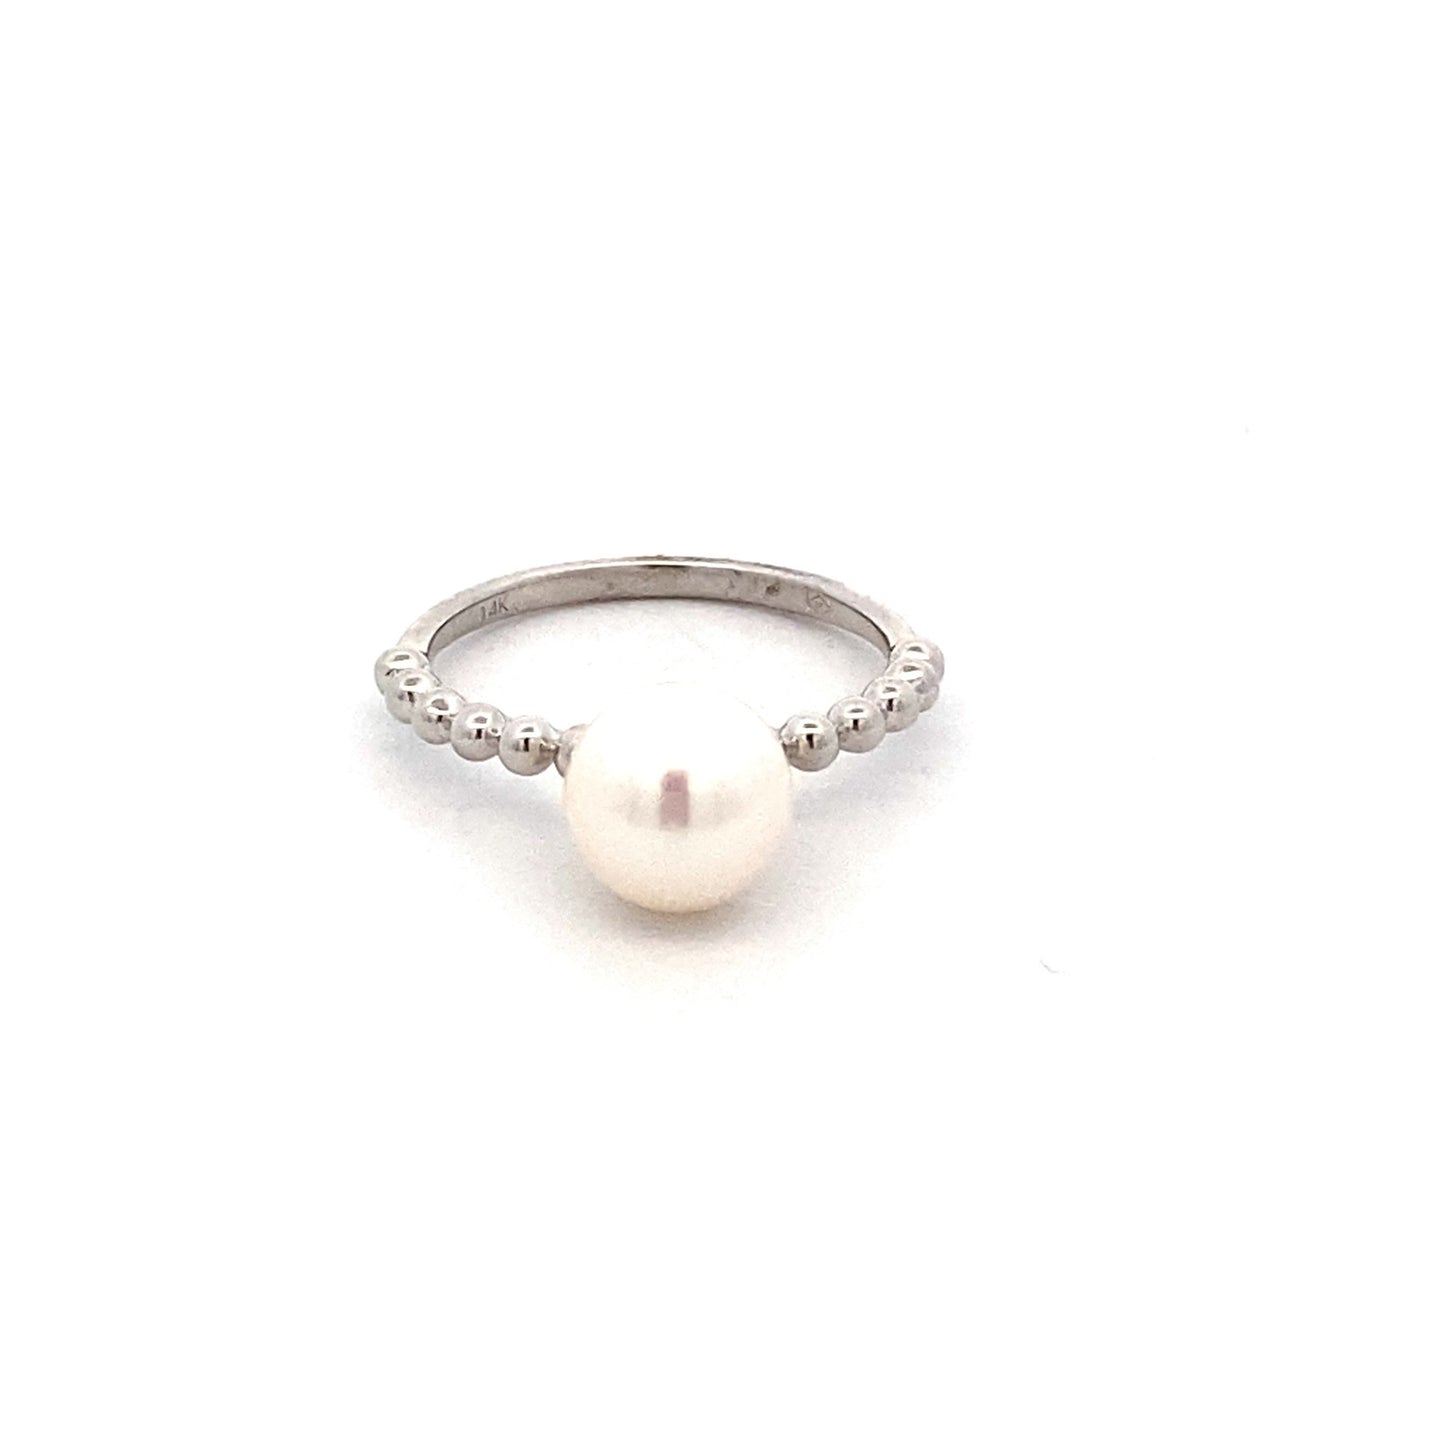 Ring fresh water pearl on bead shank - Gaines Jewelers